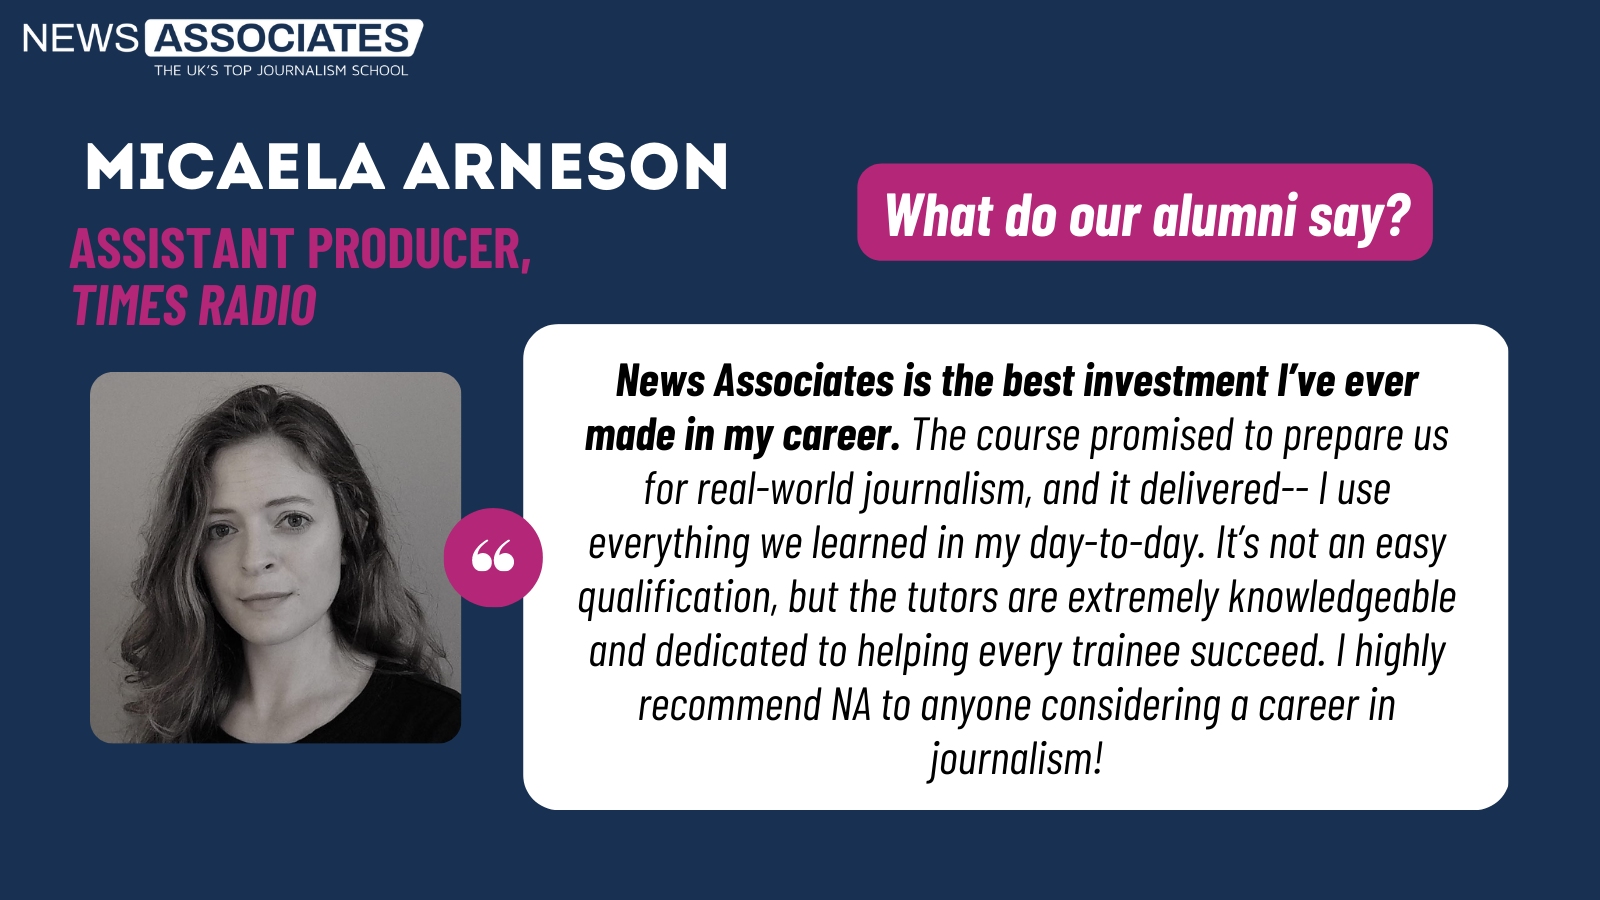 A testimonial from Micaela Arneson who works at Times Radio.